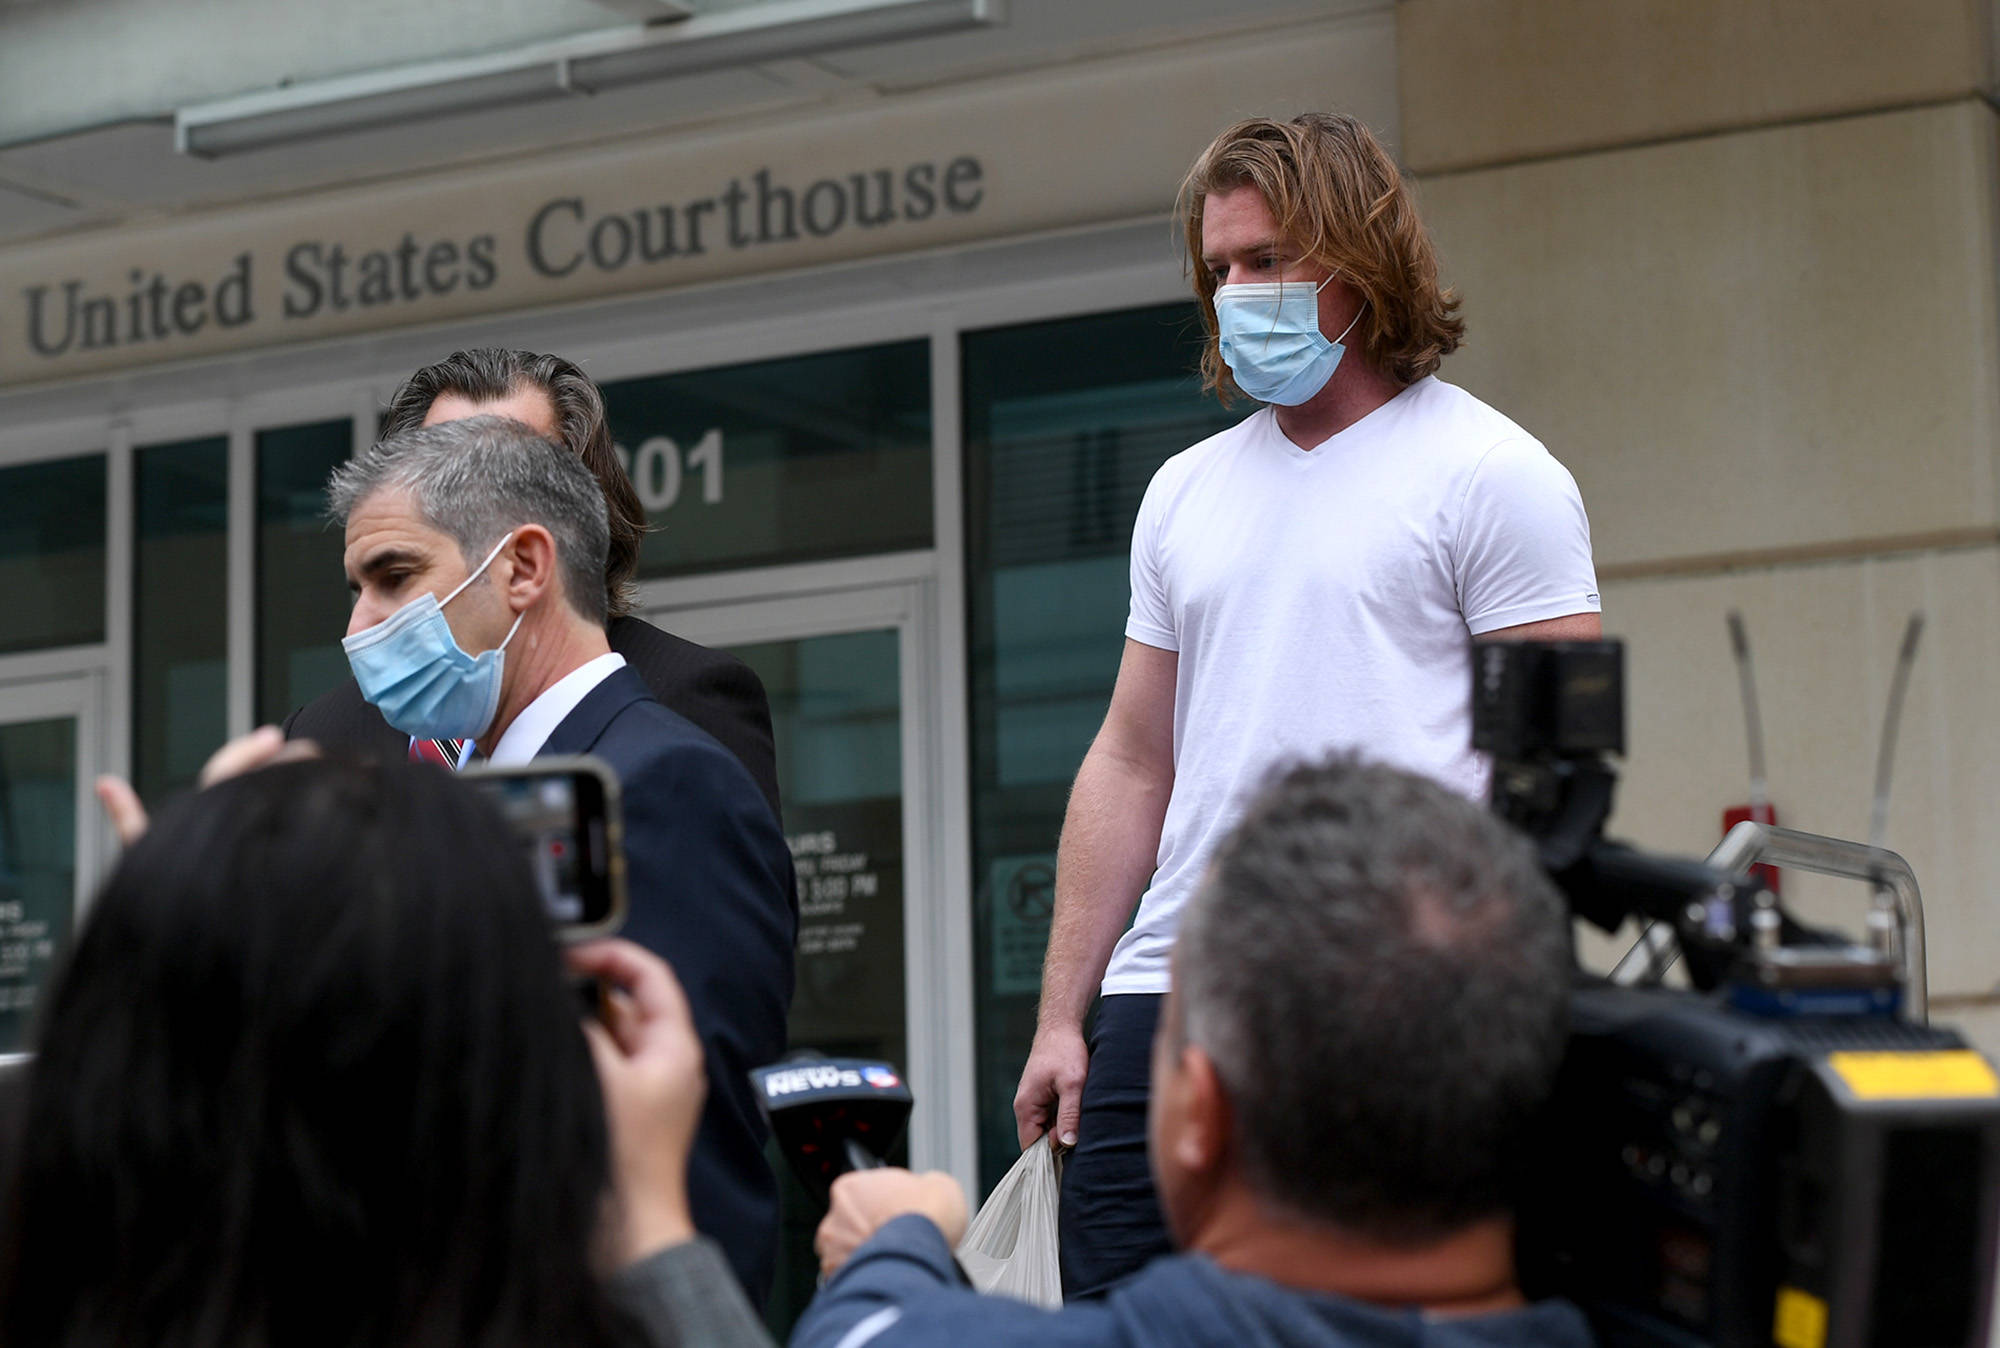 Tiffany Tompkins/Bradenton Herald 
Adam Johnson, right, emerges from the Tampa Federal Courthouse after an appearance Monday, wearing an ankle monitor.